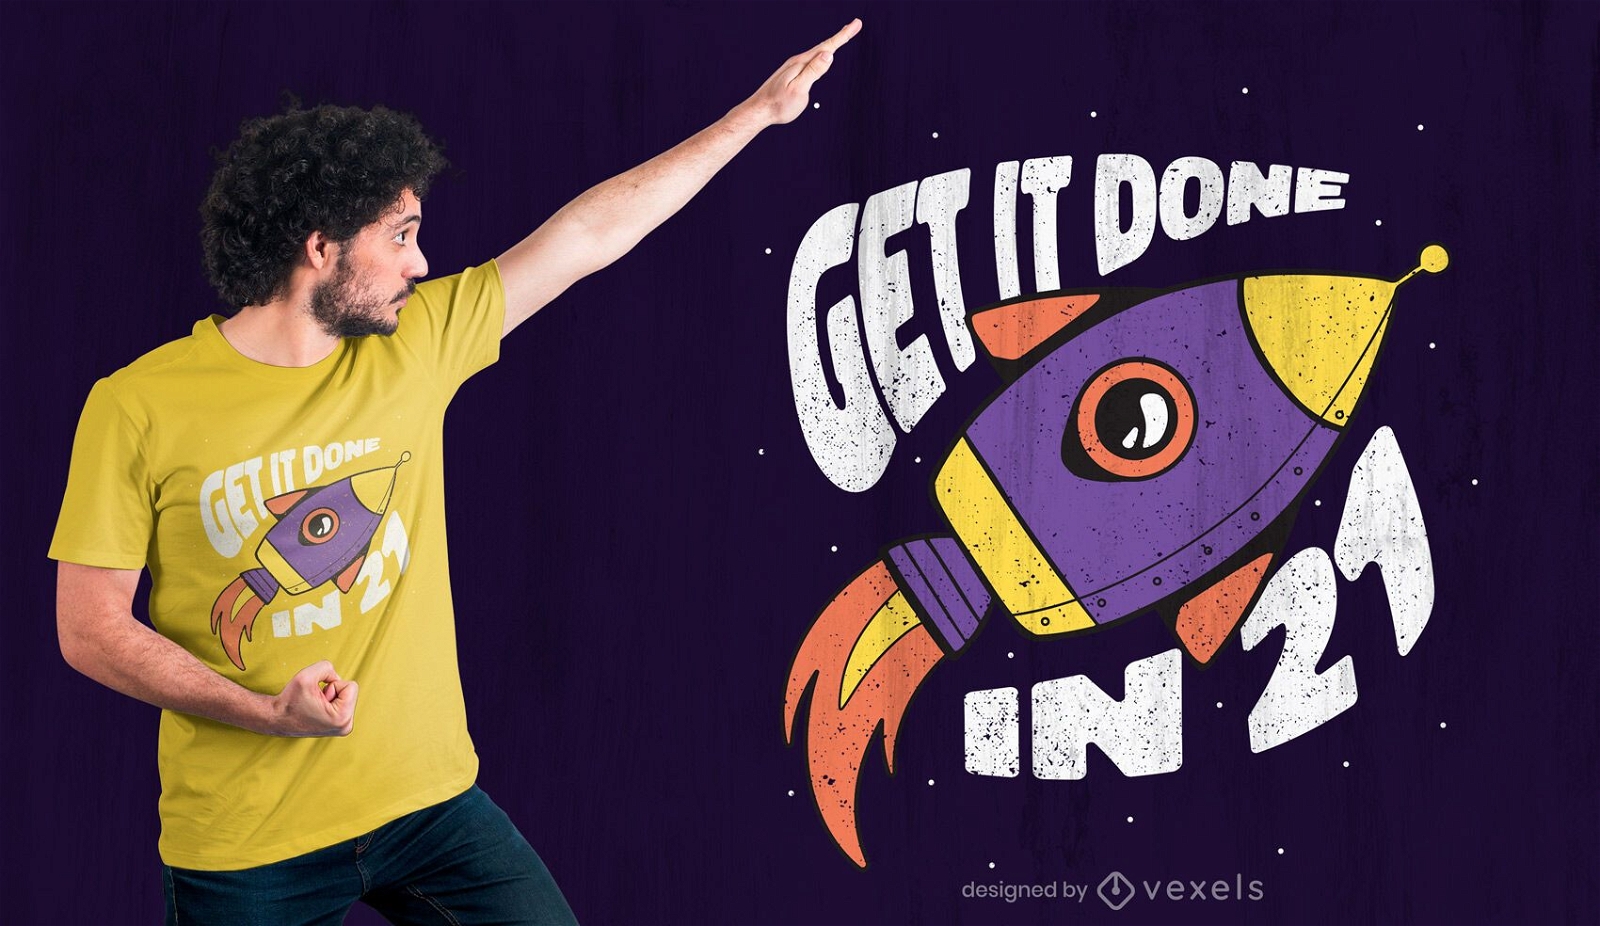 Get it done in 21 t-shirt design